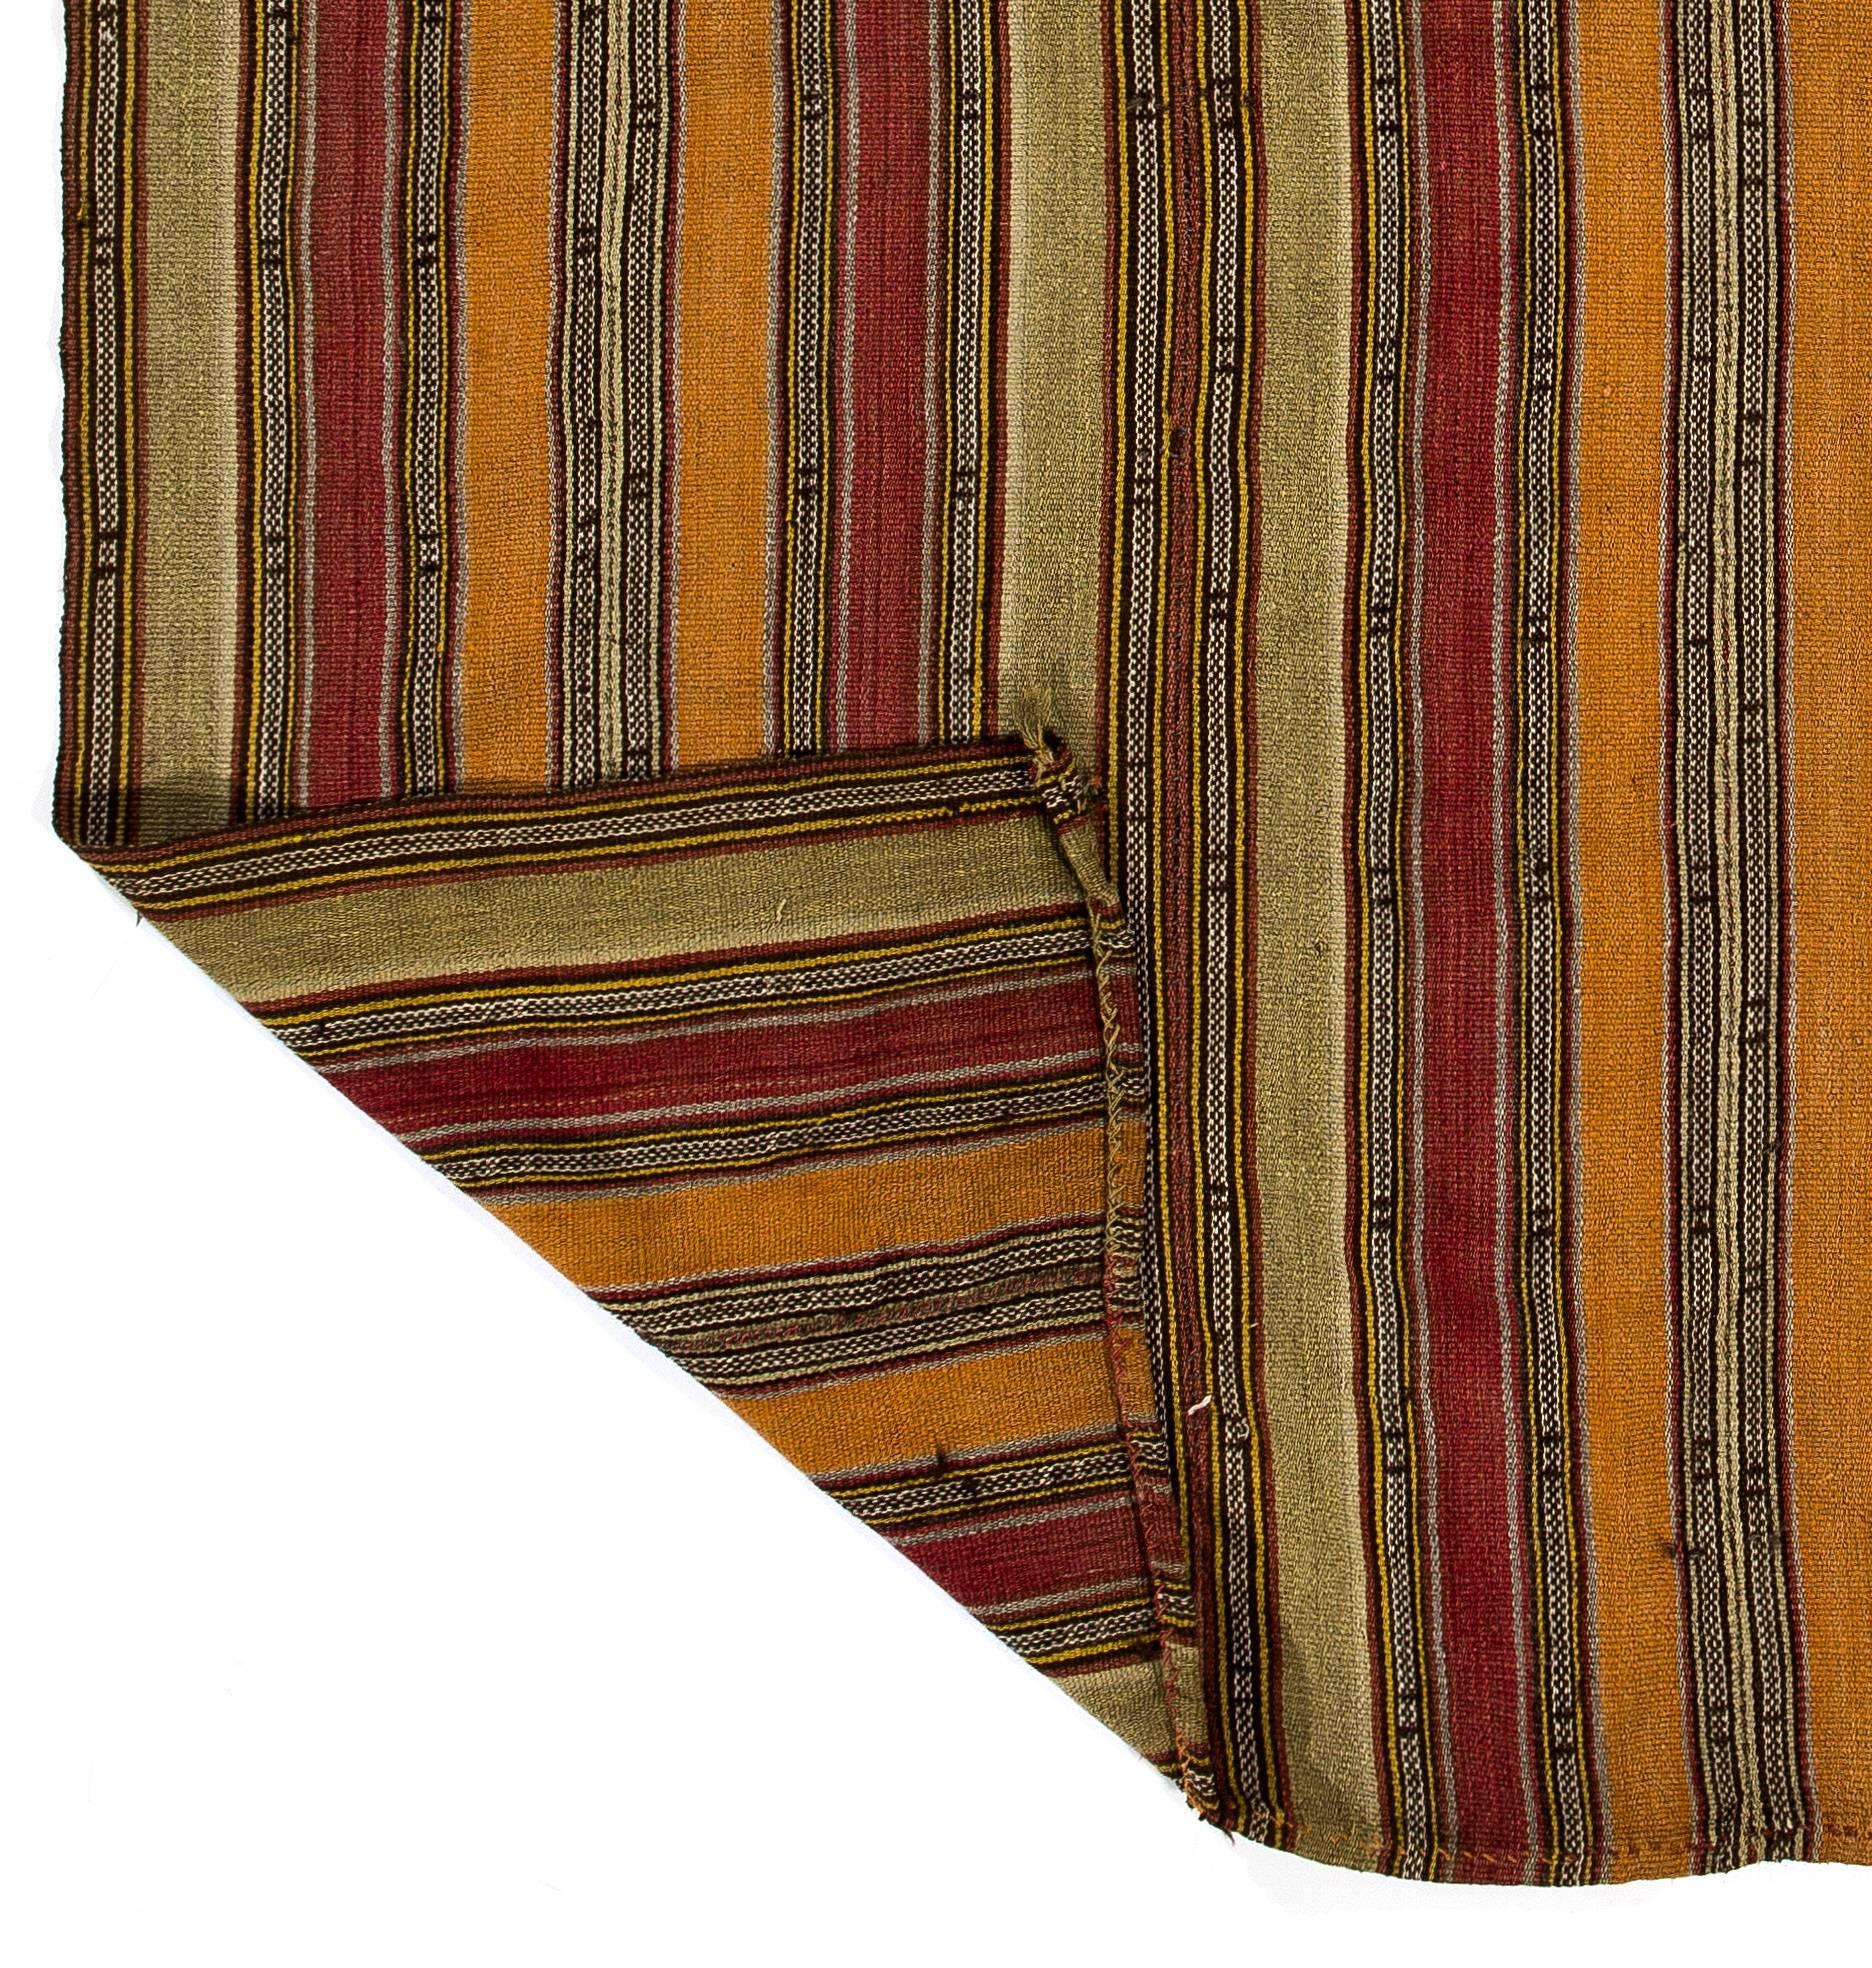 6x7.2 Ft Colorful Handwoven Turkish Kilim Rug with Vertical Bands, 100% Wool For Sale 1